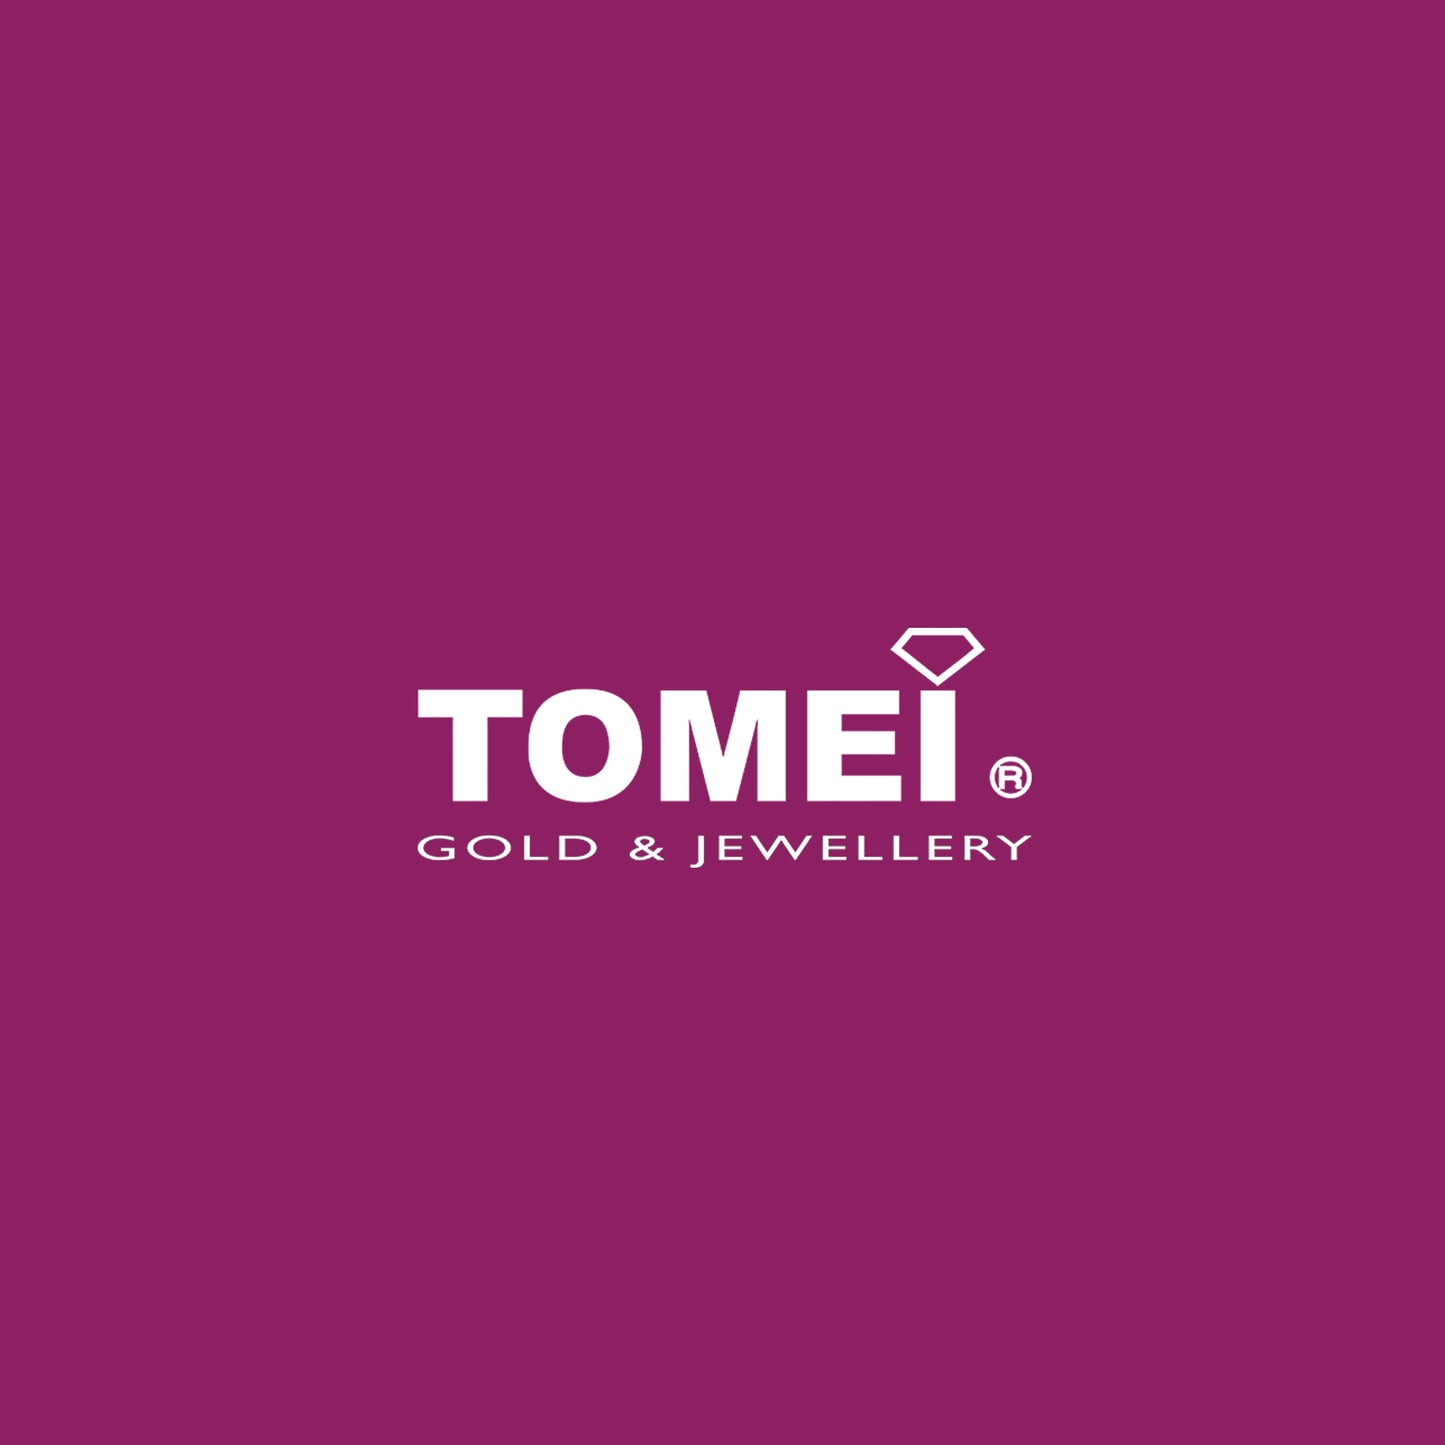 TOMEI Bracelet of Childhood Joy and Delight, Yellow Gold 916 (9M-BR3729-2C)